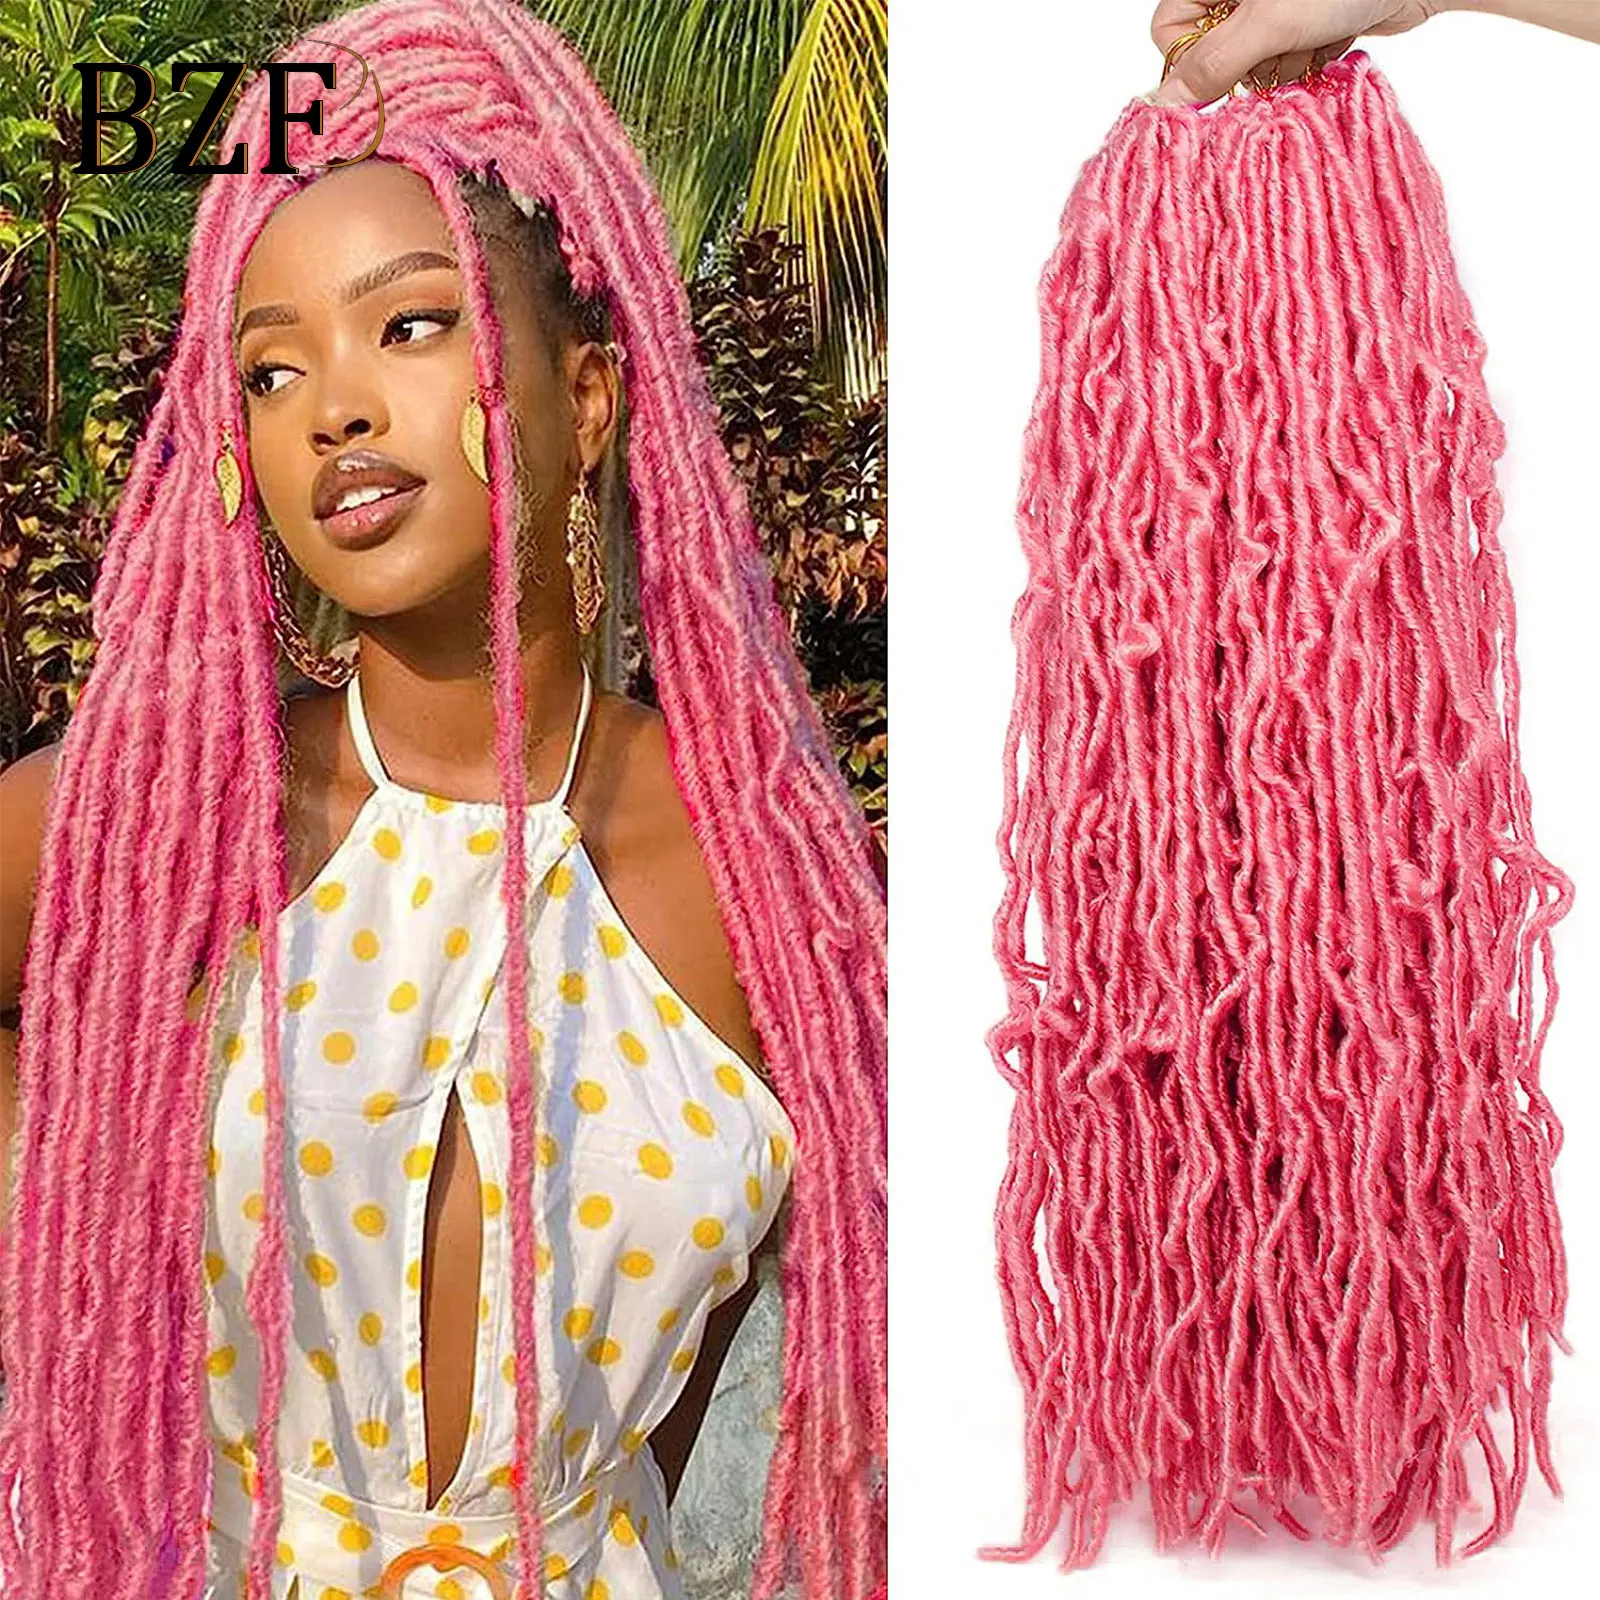 36inch pink soft new faux locs crochet hair braids for women red grey blonde goddess nu thumb200